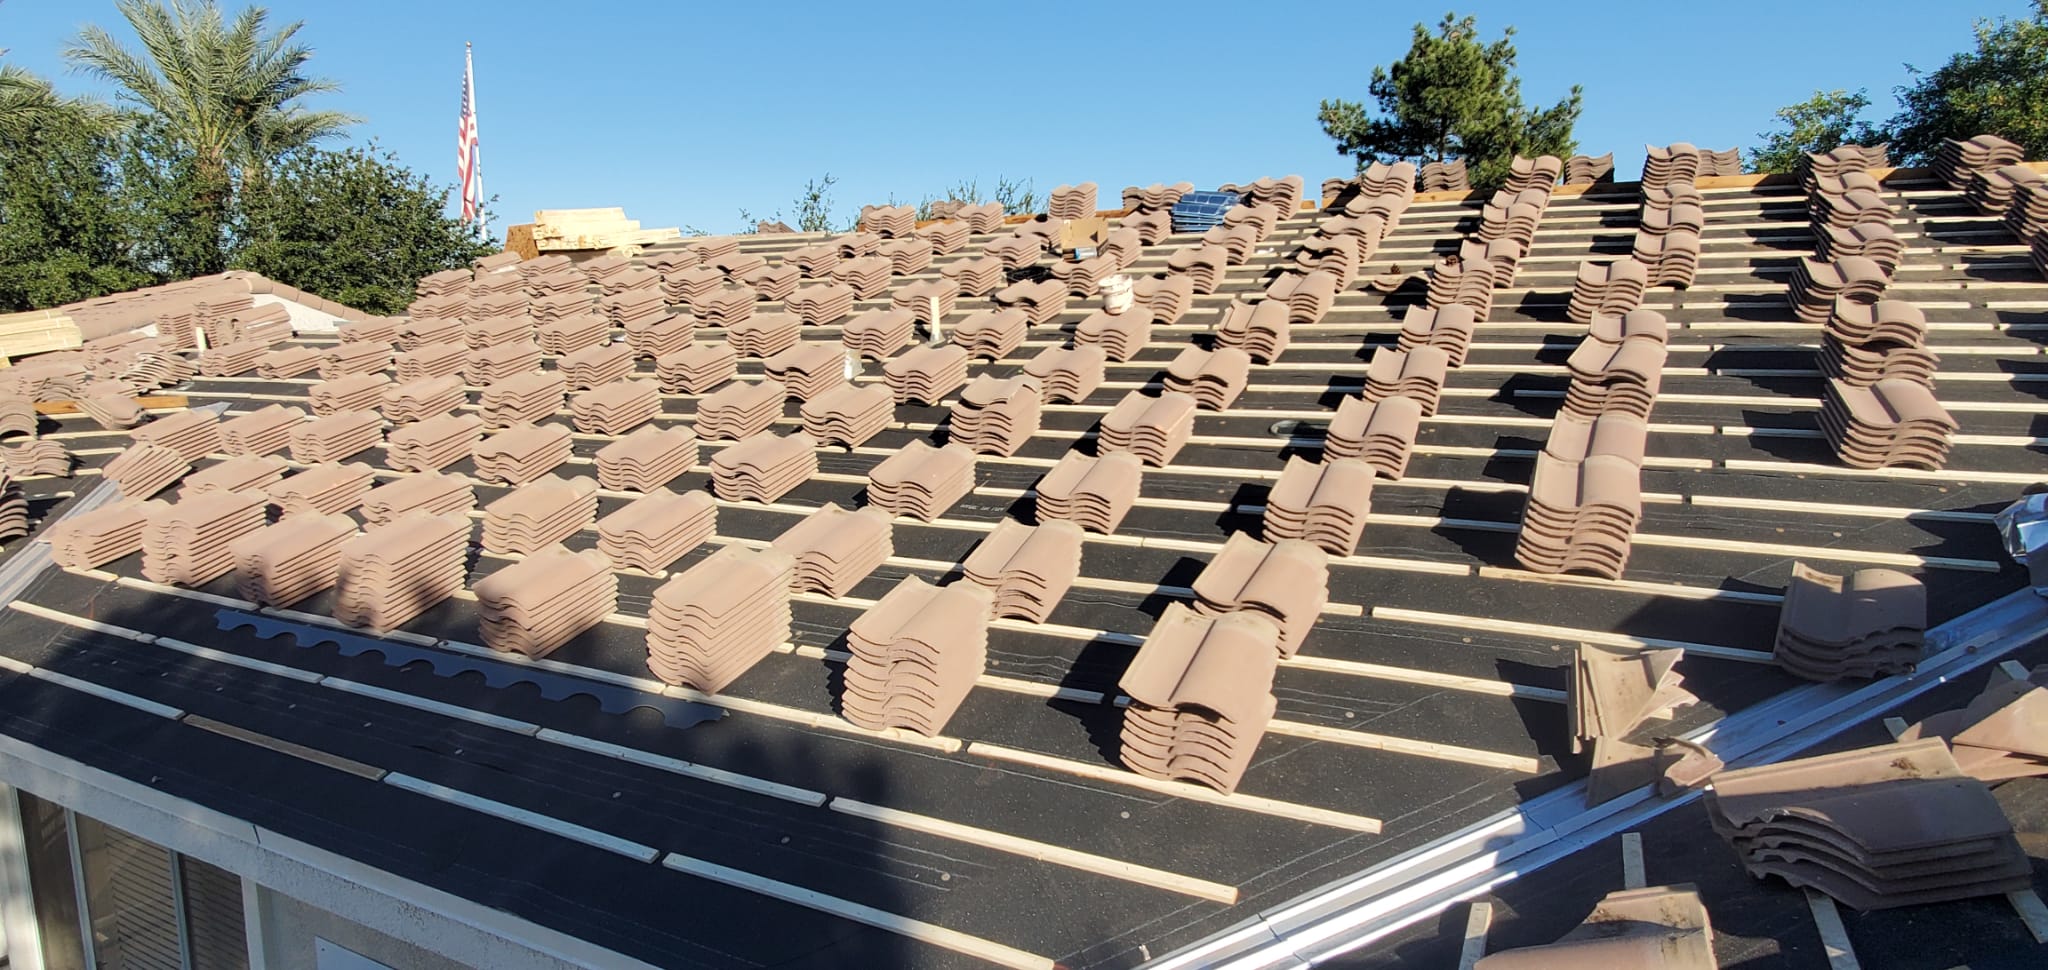 Material tiles neatly arranged on a roof, ready for installation in a Tempe tile roof replacement project.